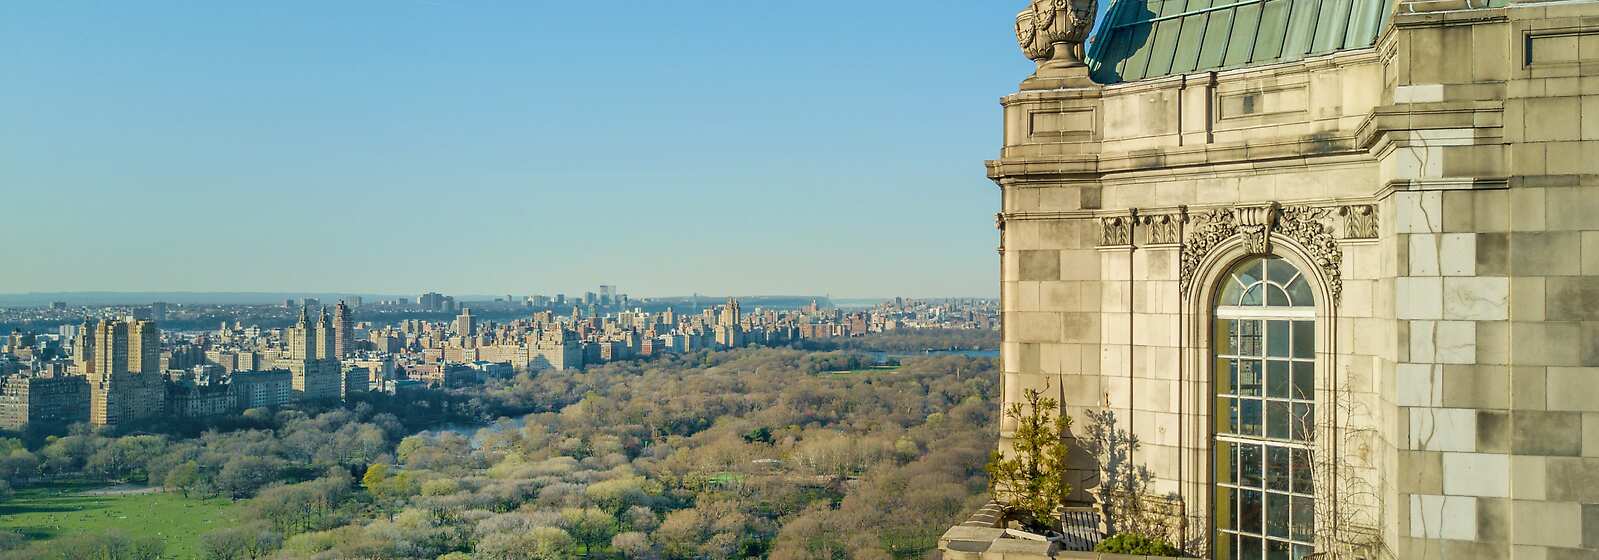 The iconic Pierre at Central Park & Fifth Avenue